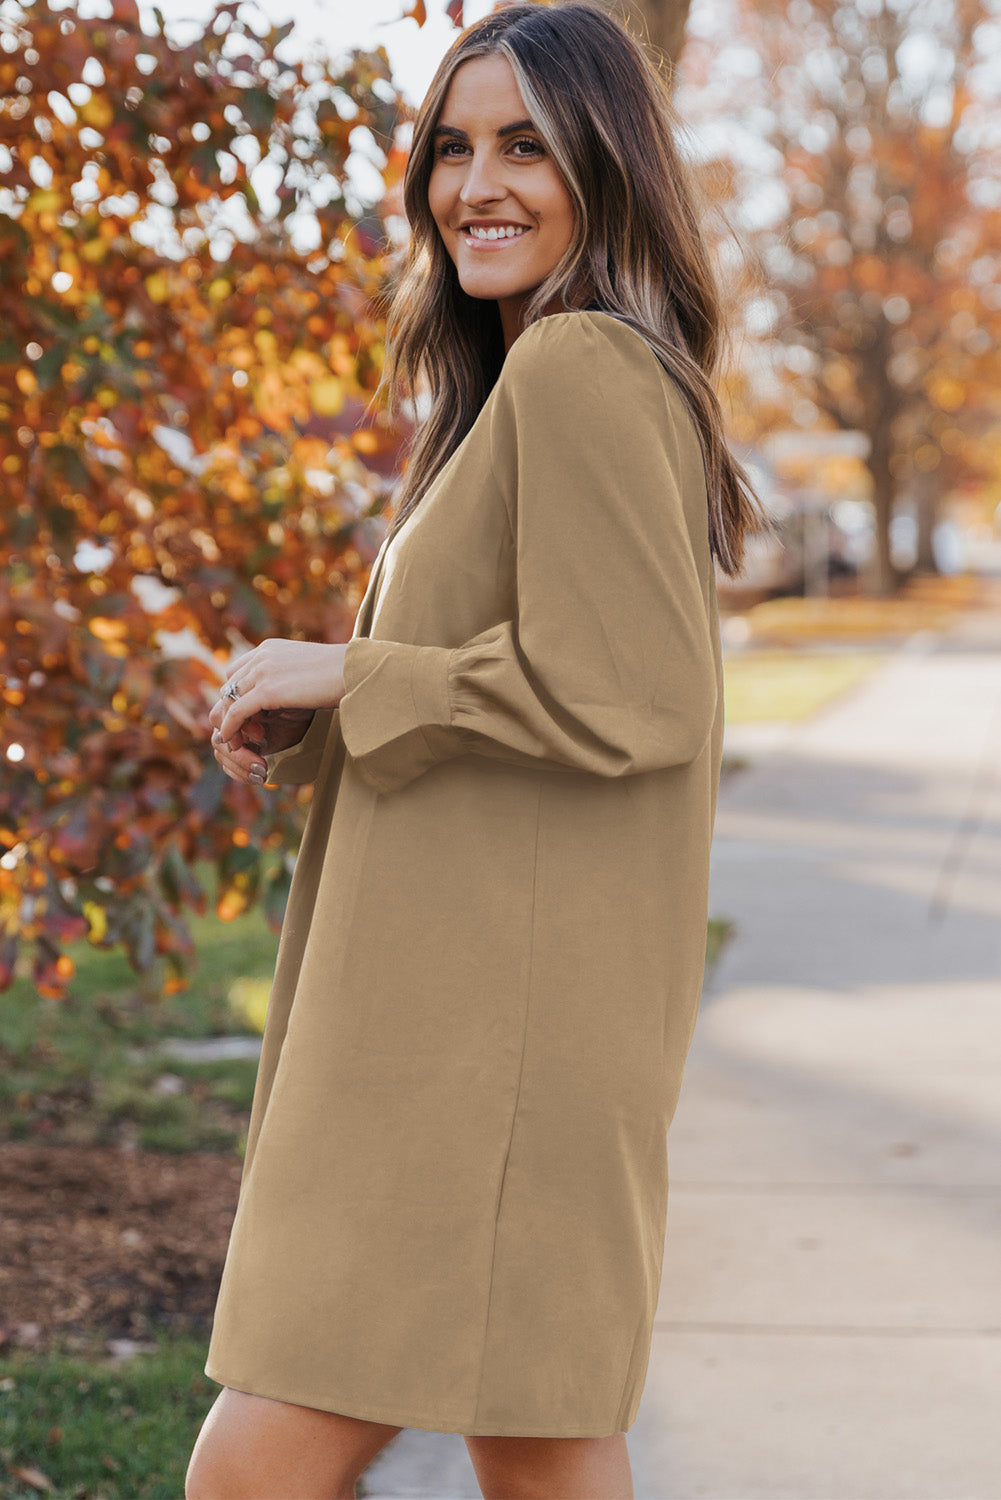 Long Puff Sleeve Notched Neck Dress